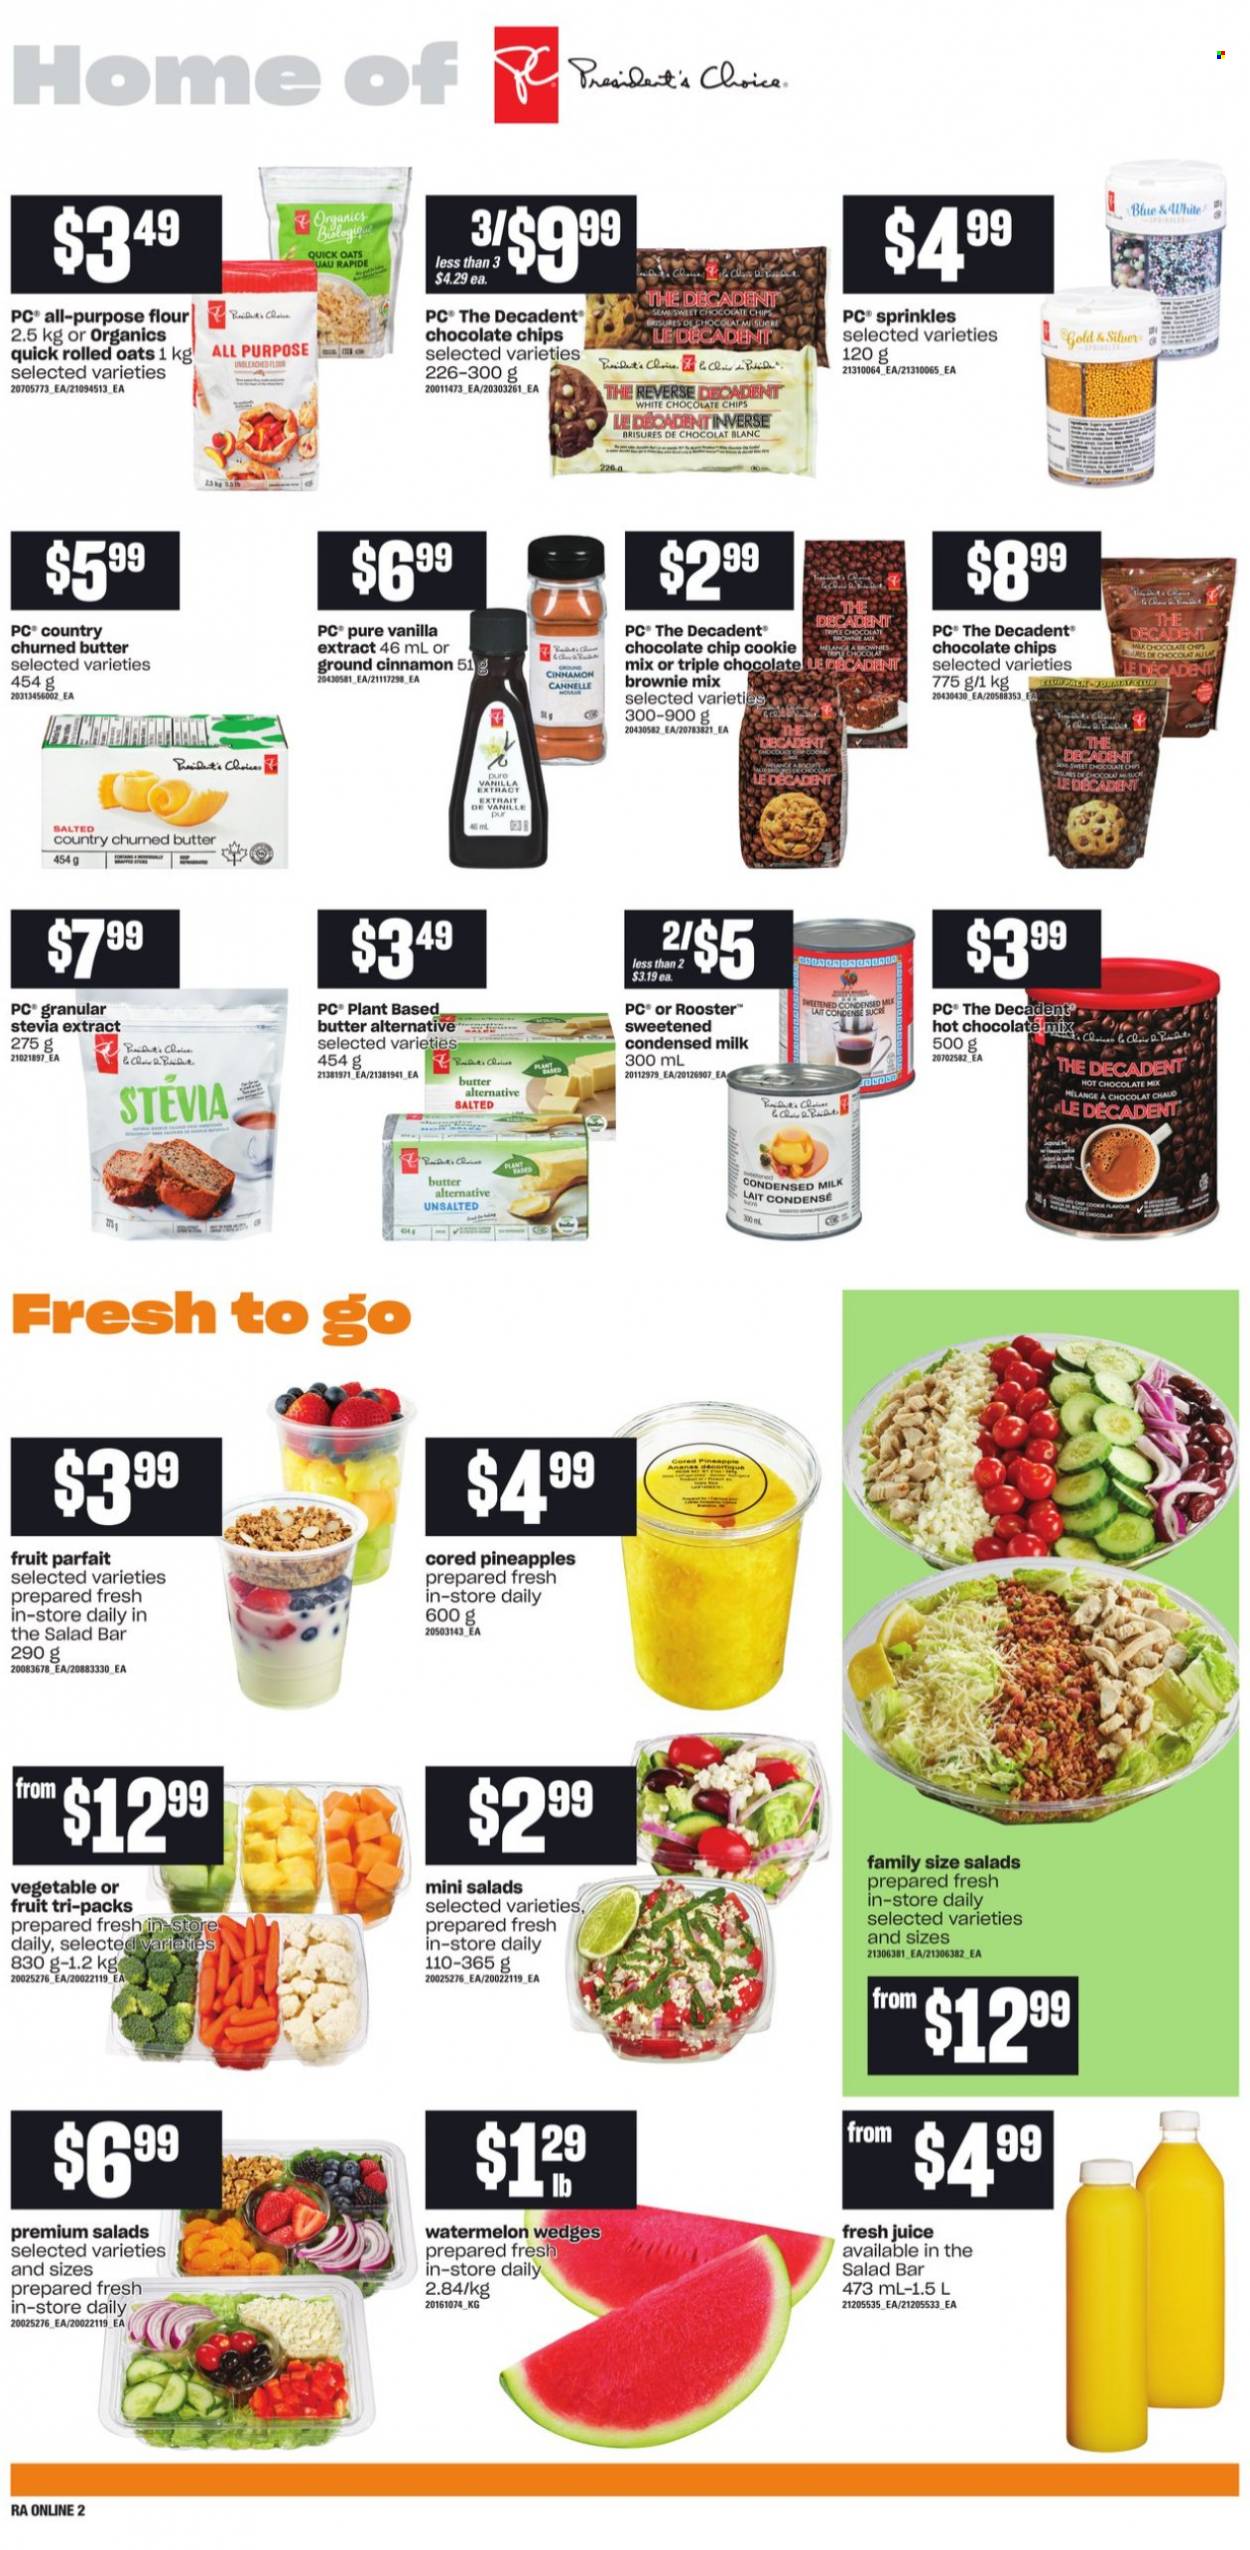 thumbnail - Atlantic Superstore Flyer - October 21, 2021 - October 27, 2021 - Sales products - brownie mix, salad, watermelon, pineapple, milk, condensed milk, butter, flour, oats, vanilla extract, stevia, rolled oats, Quick Oats, cinnamon, juice, hot chocolate. Page 6.